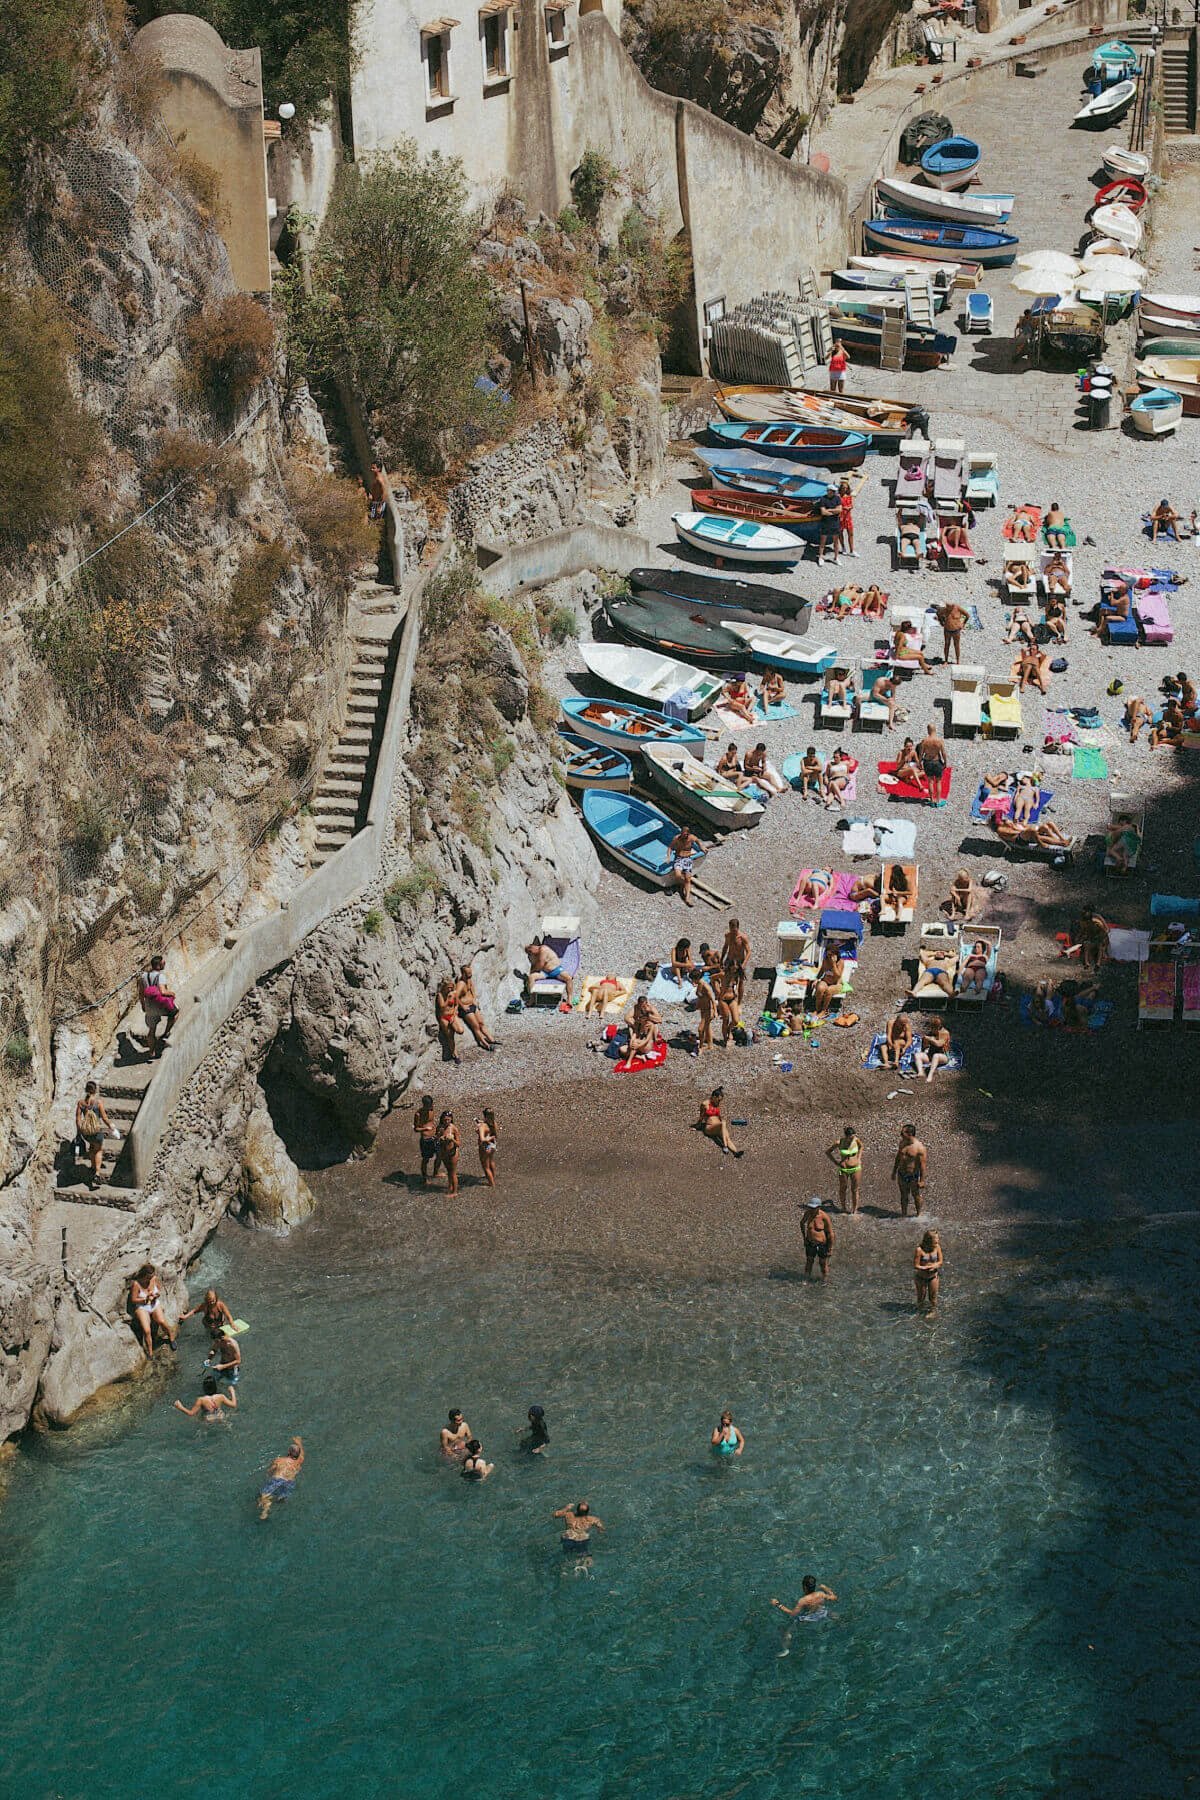 Guide to Positano: what to see, where to eat, where to stay